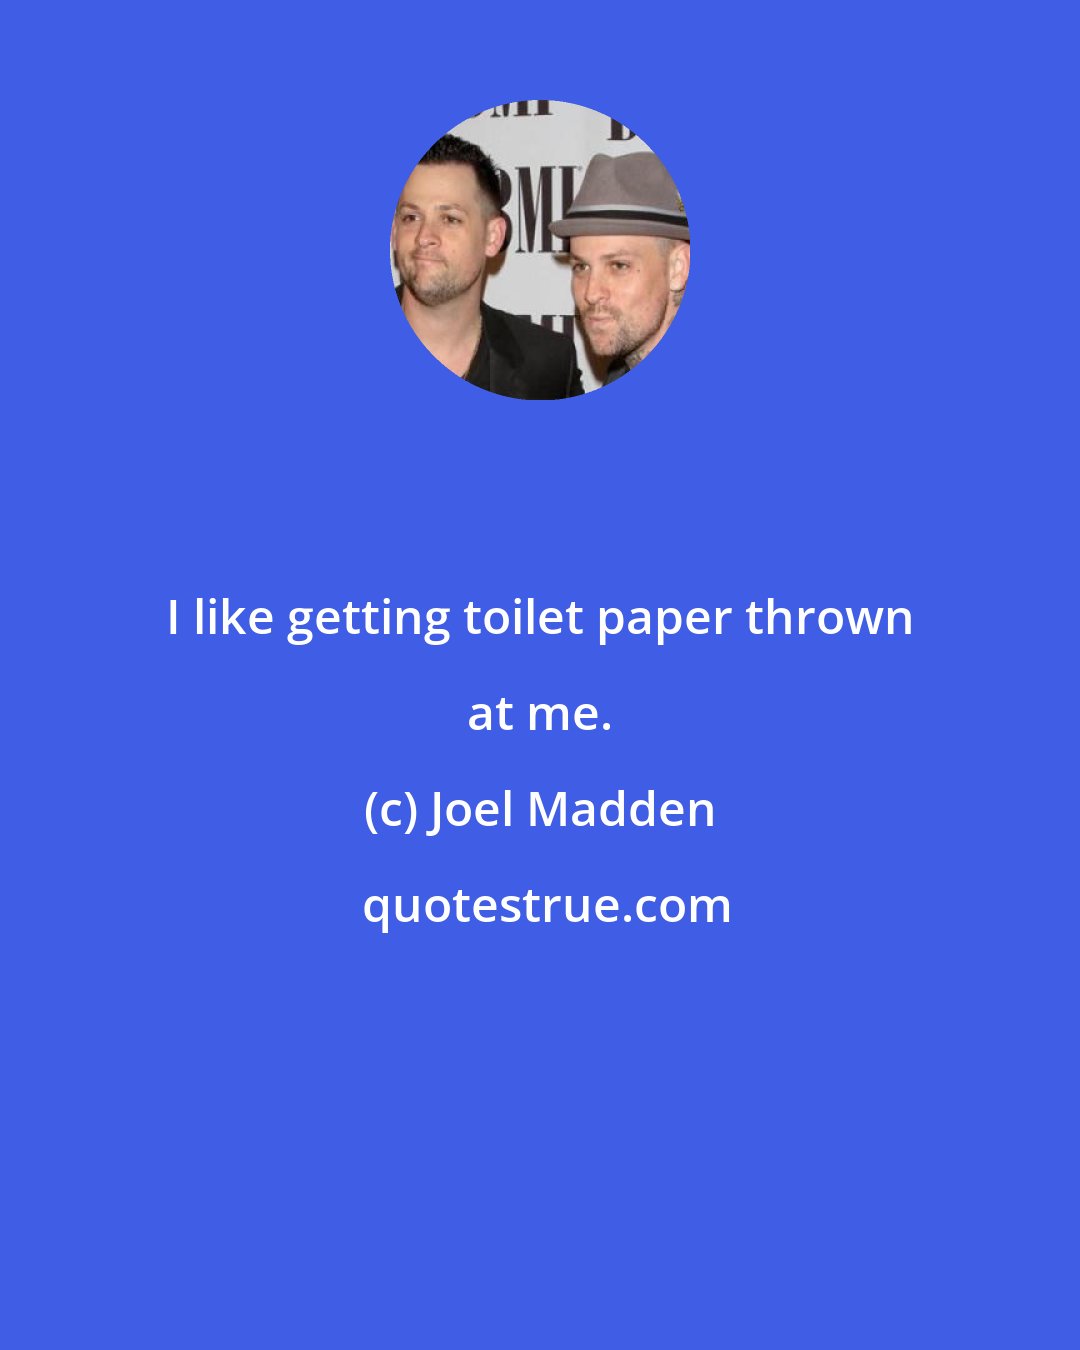 Joel Madden: I like getting toilet paper thrown at me.